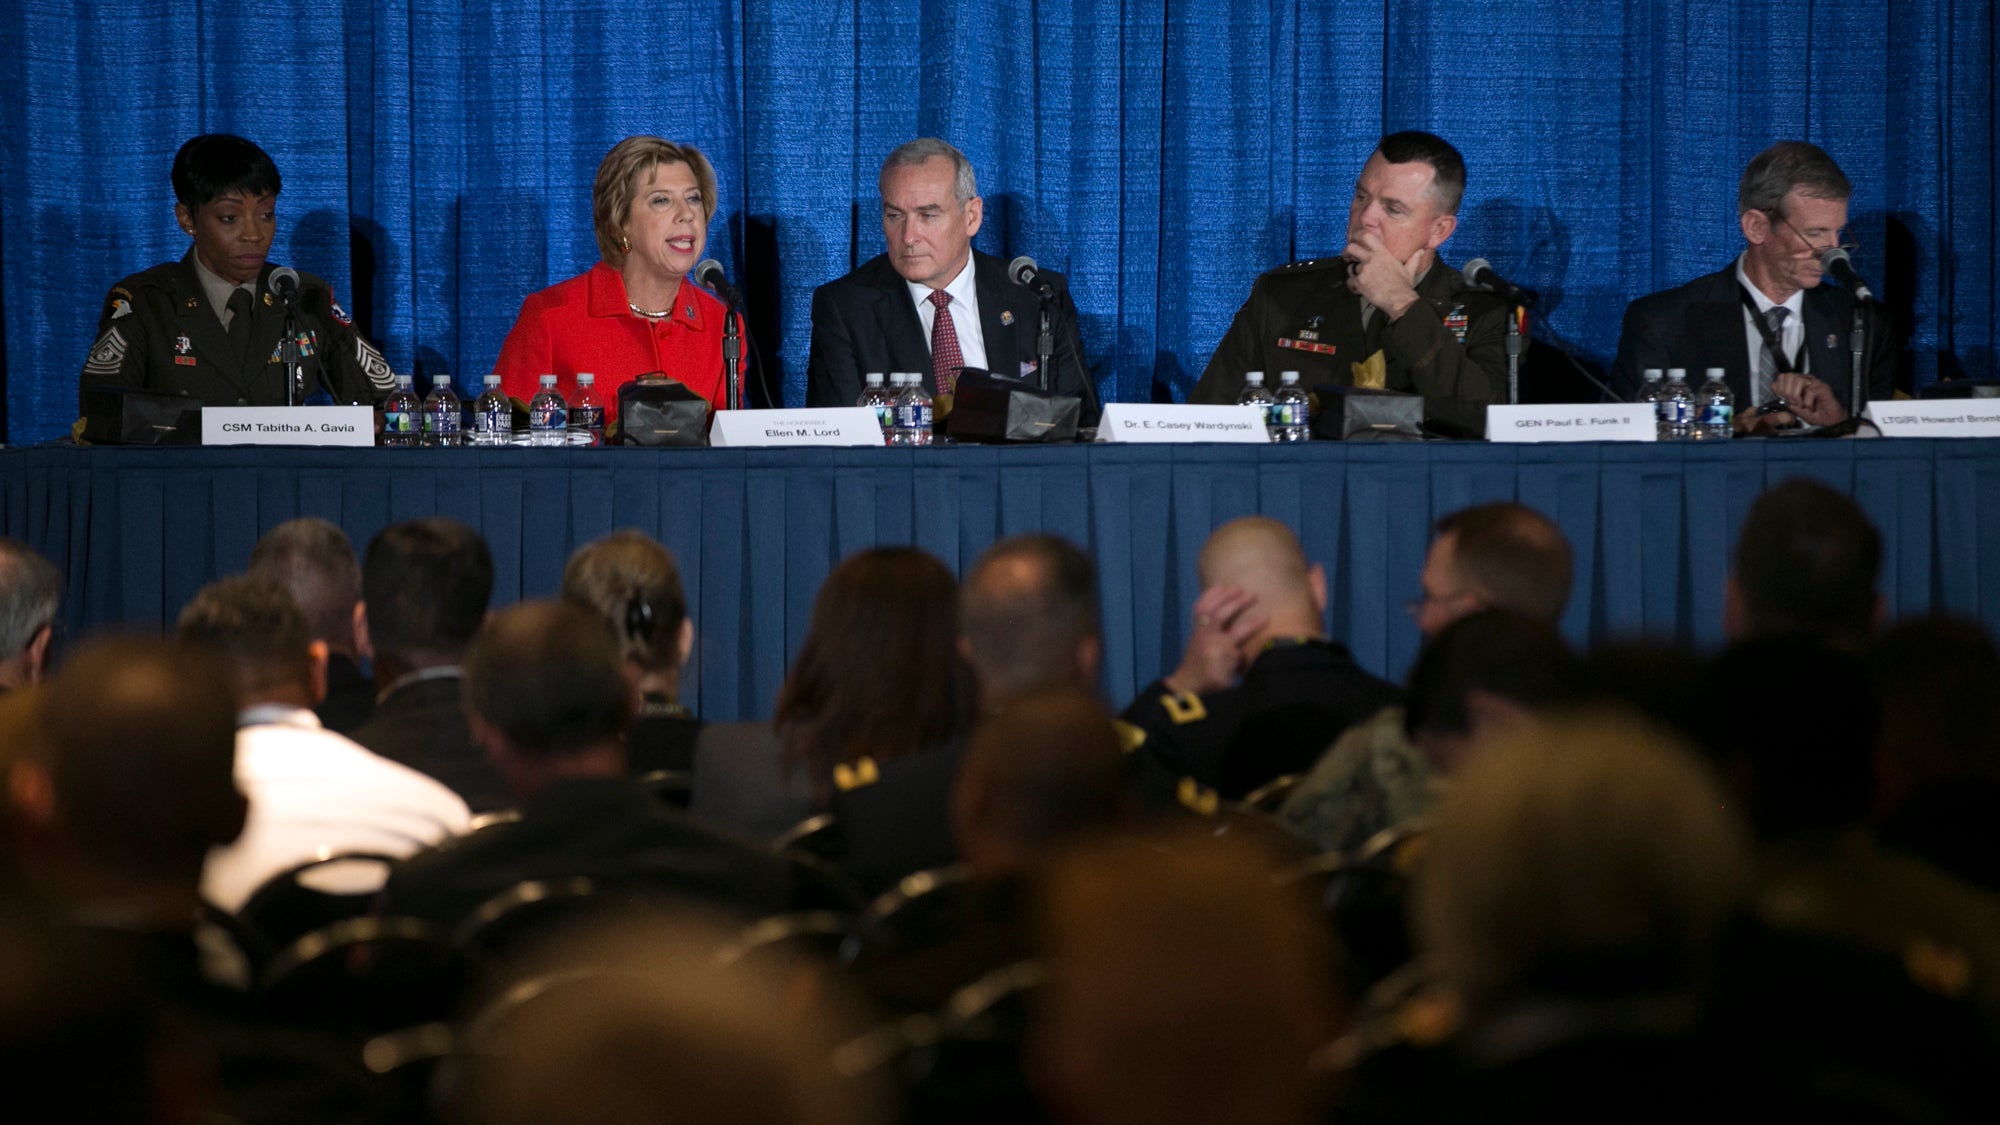 The Army is People session at the 2019 AUSA Annual Meeting and Exposition at the Washington Convention Center on Oct. 14, 2019.  Session speakers from left: CSM Tabitha Gavia; Ellen Lord; Dr. E. Casey Wardynski; Gen. Paul Funk, and LTG Howard Bromberg.